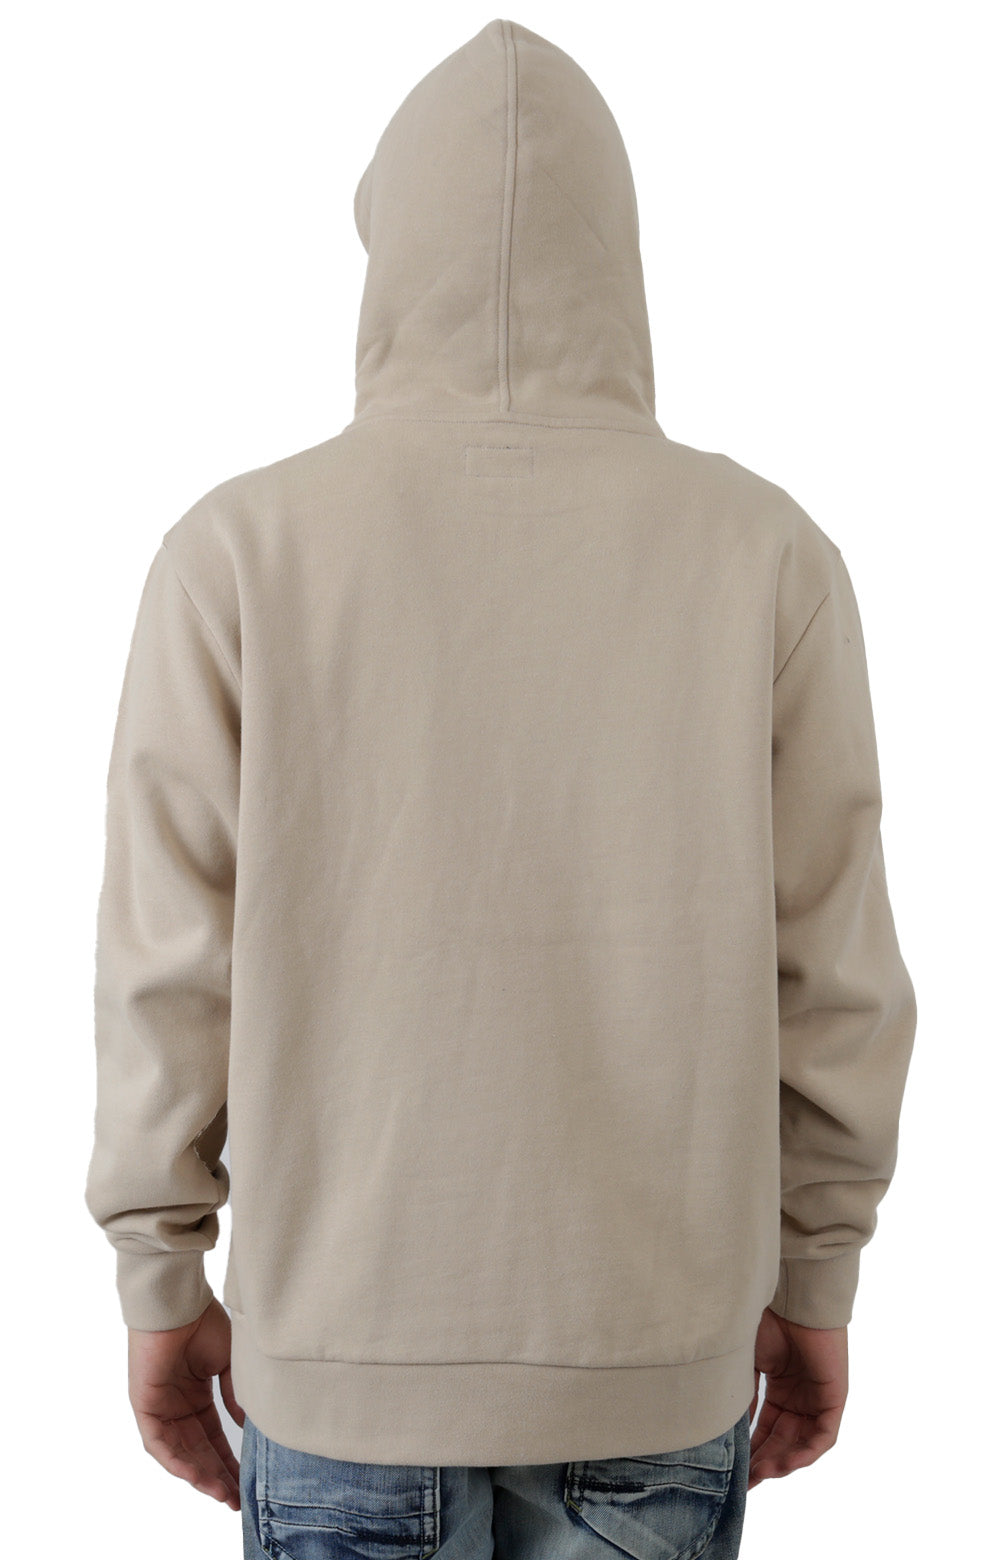 Lady Friend Pullover Hoodie - Almond